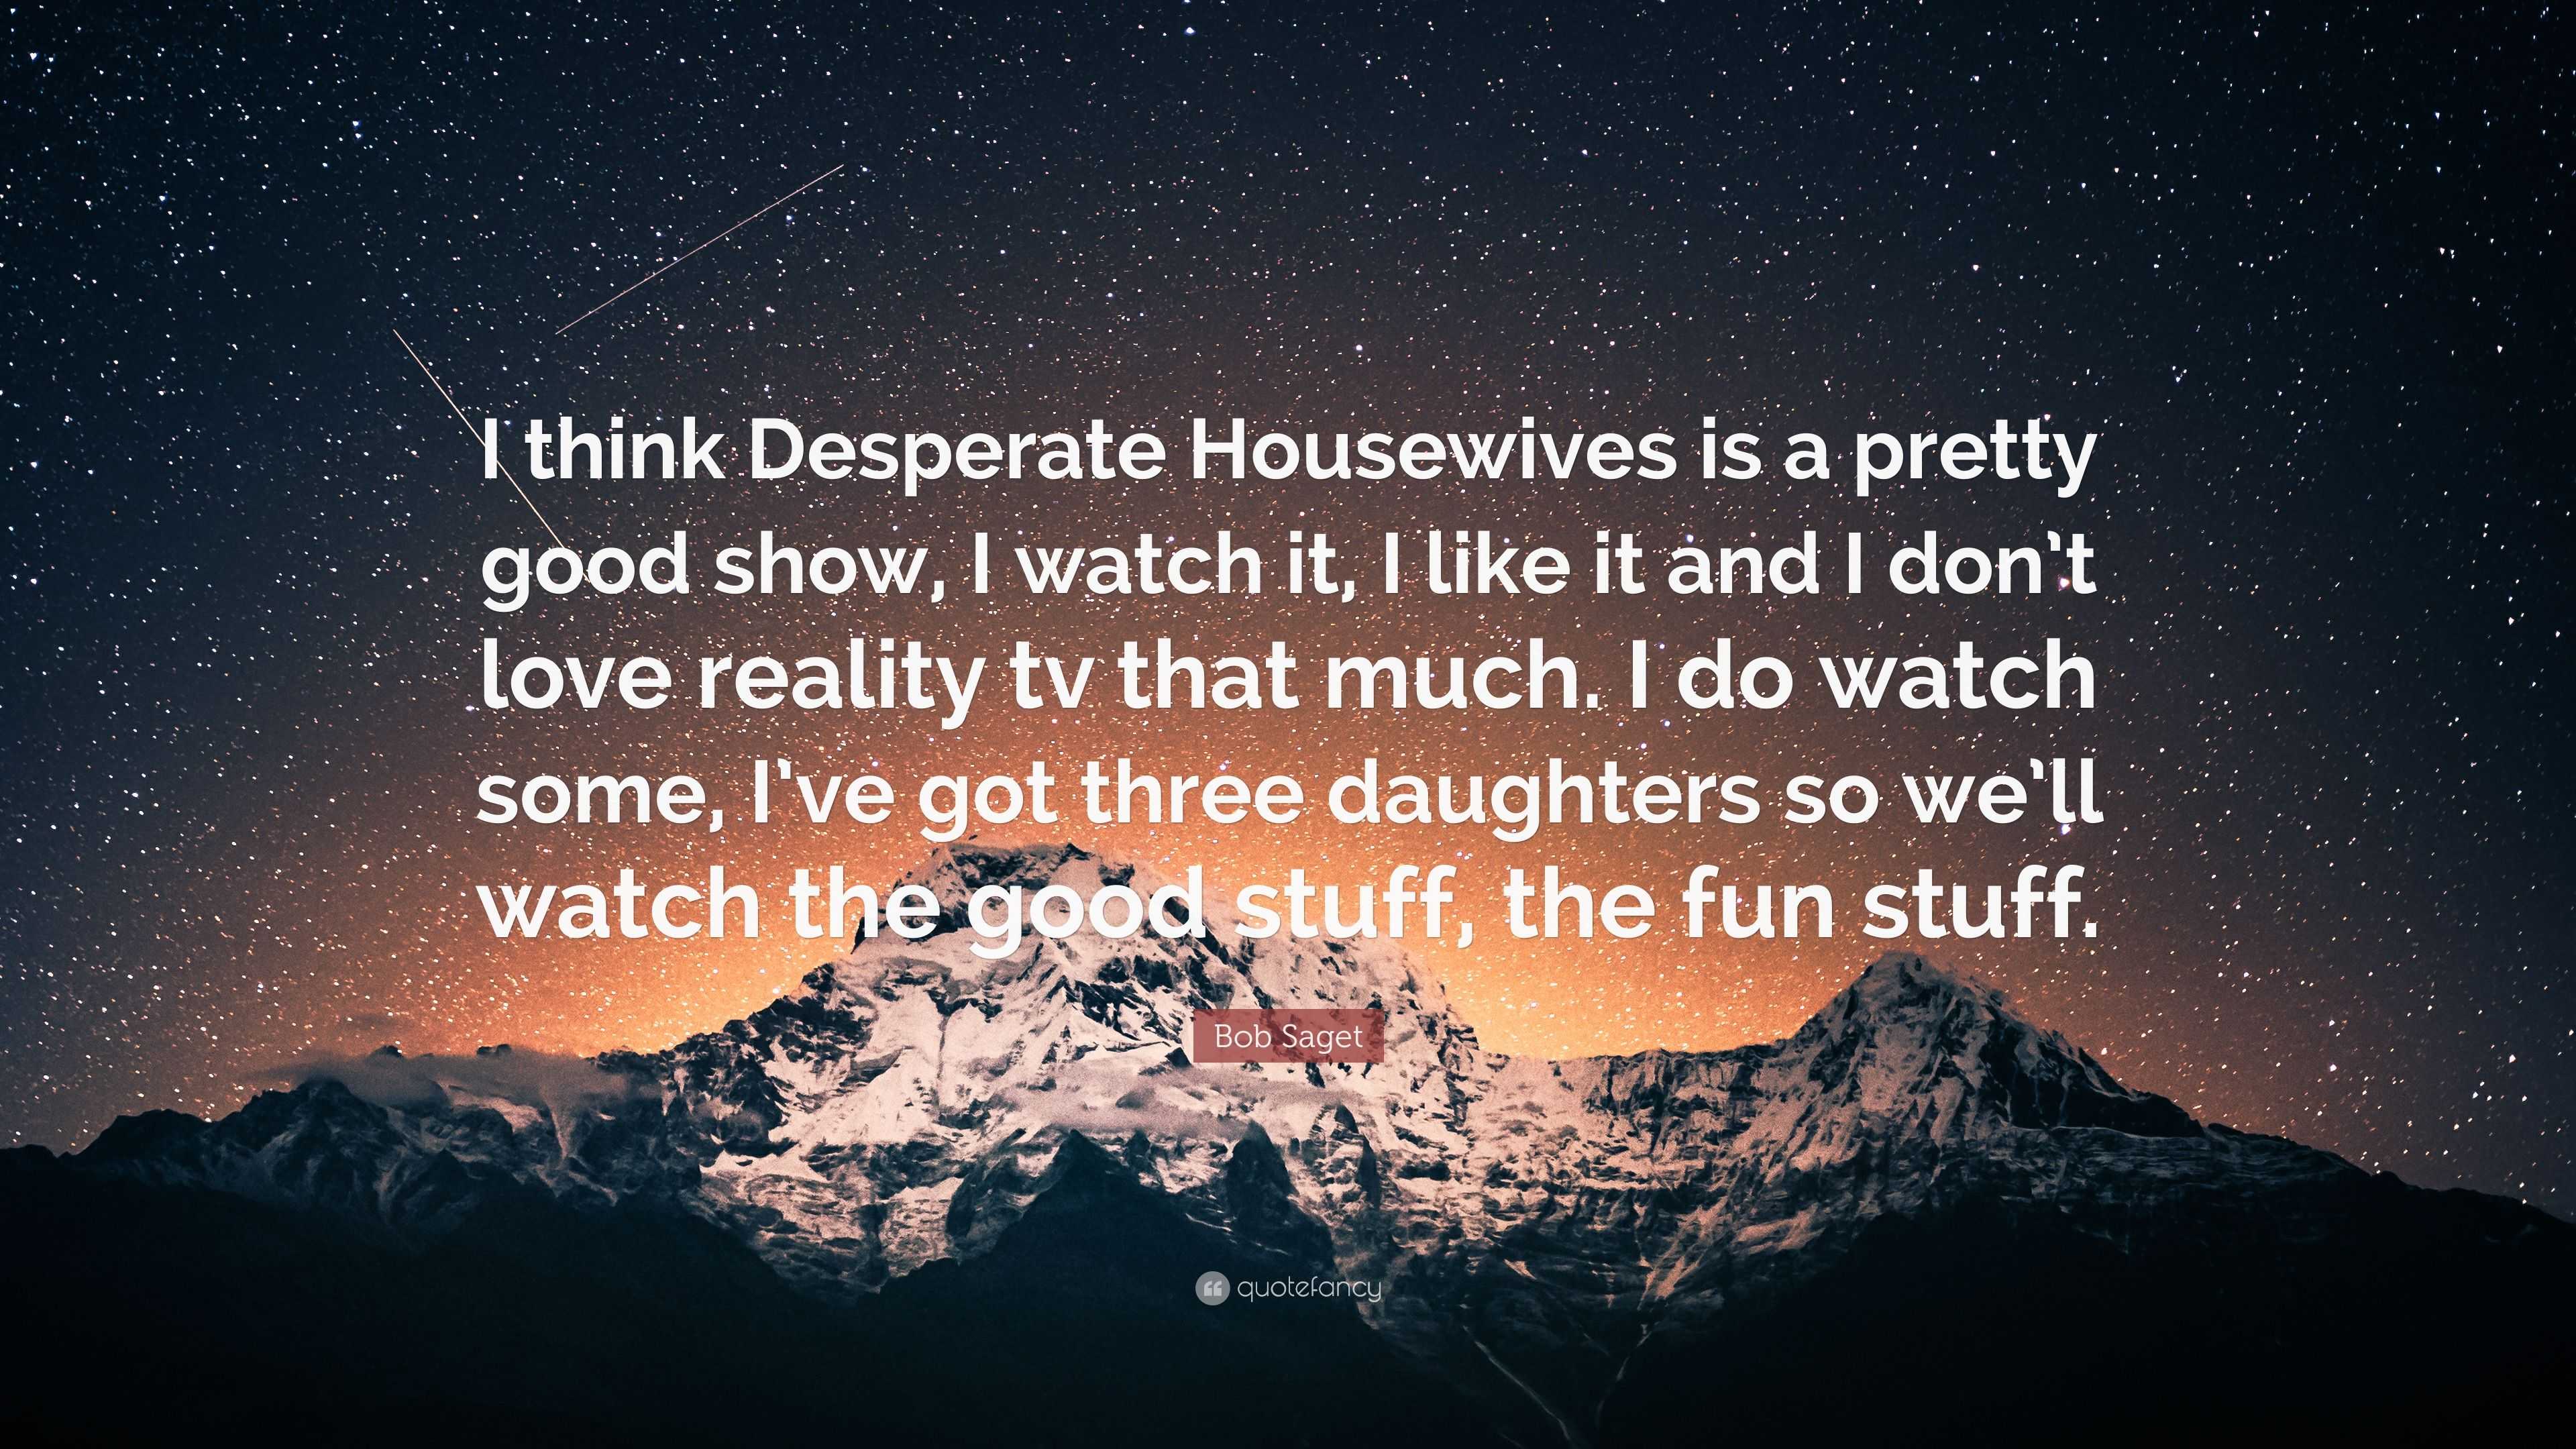 Mother's ruin: how a flying fence killed Desperate Housewives | Television  | The Guardian